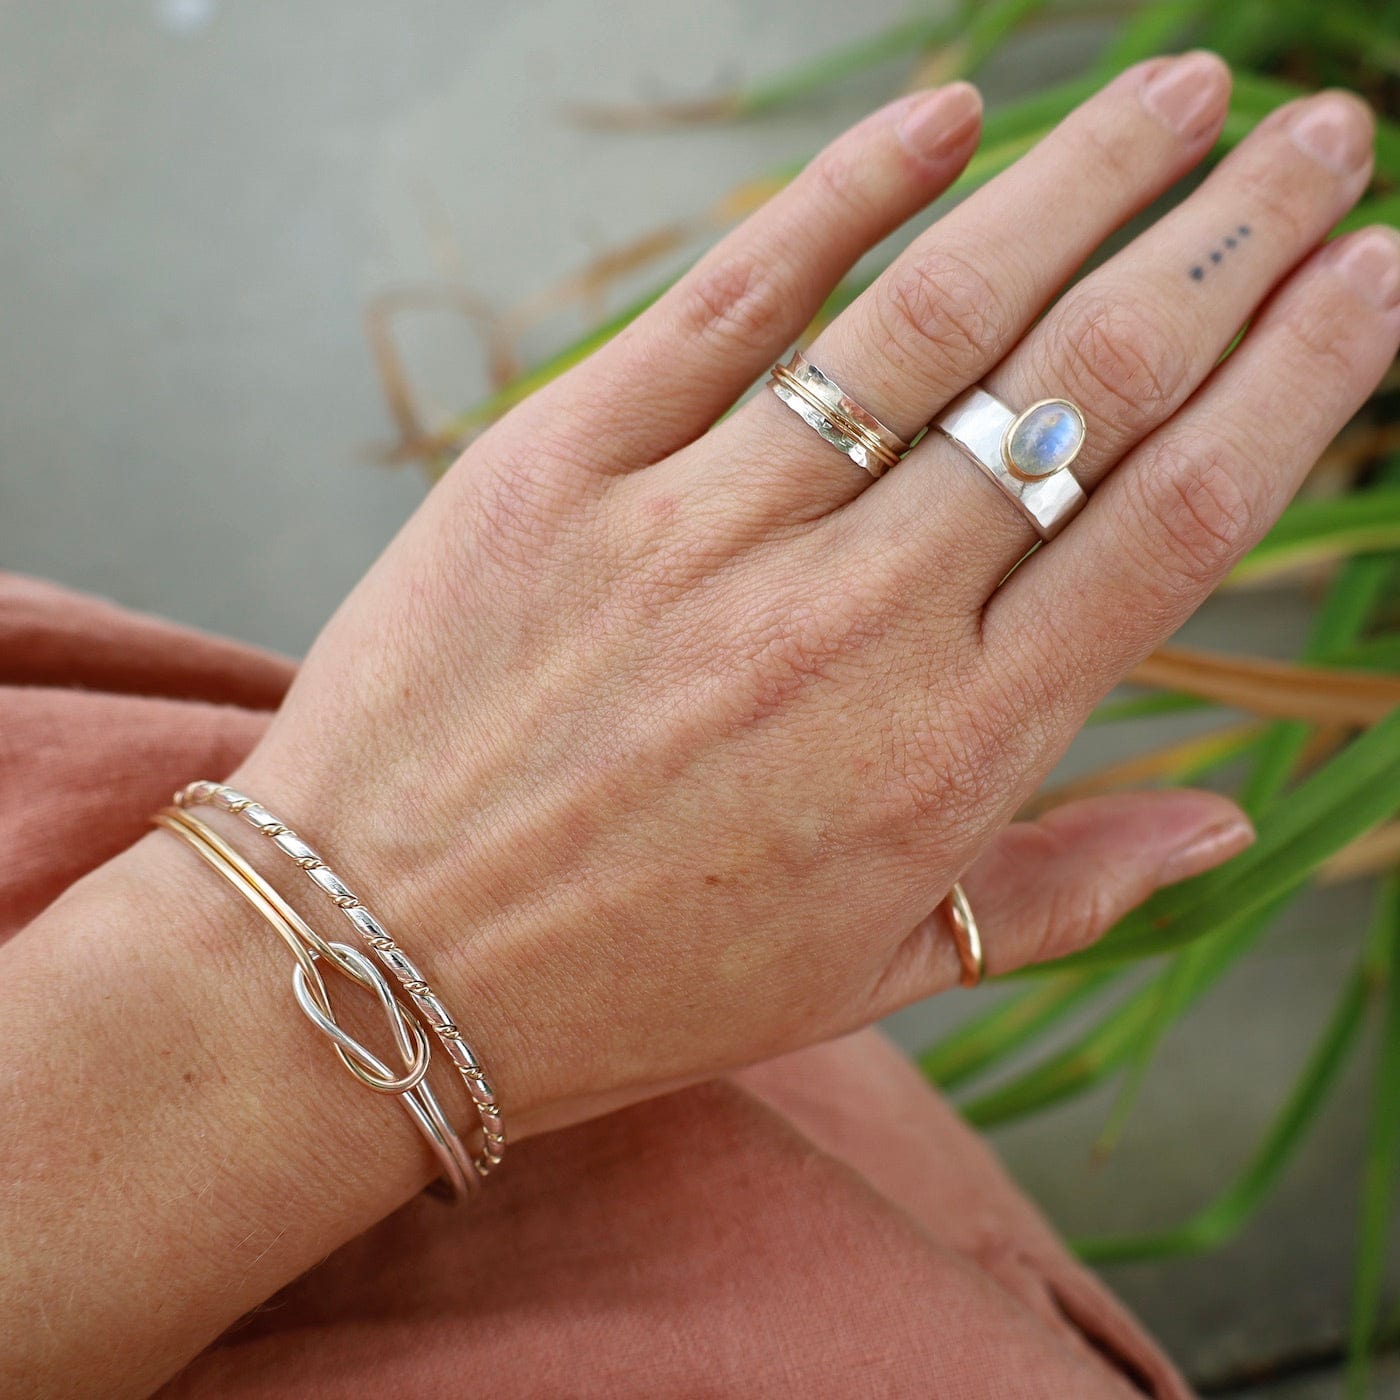 Amazon.com: The Hera Stack | Set of 7 Mixed Metal Textured Thin Stacking  Rings in Silver and Gold | Comfort Fit | USA Sizes 4-12 (8) : Handmade  Products